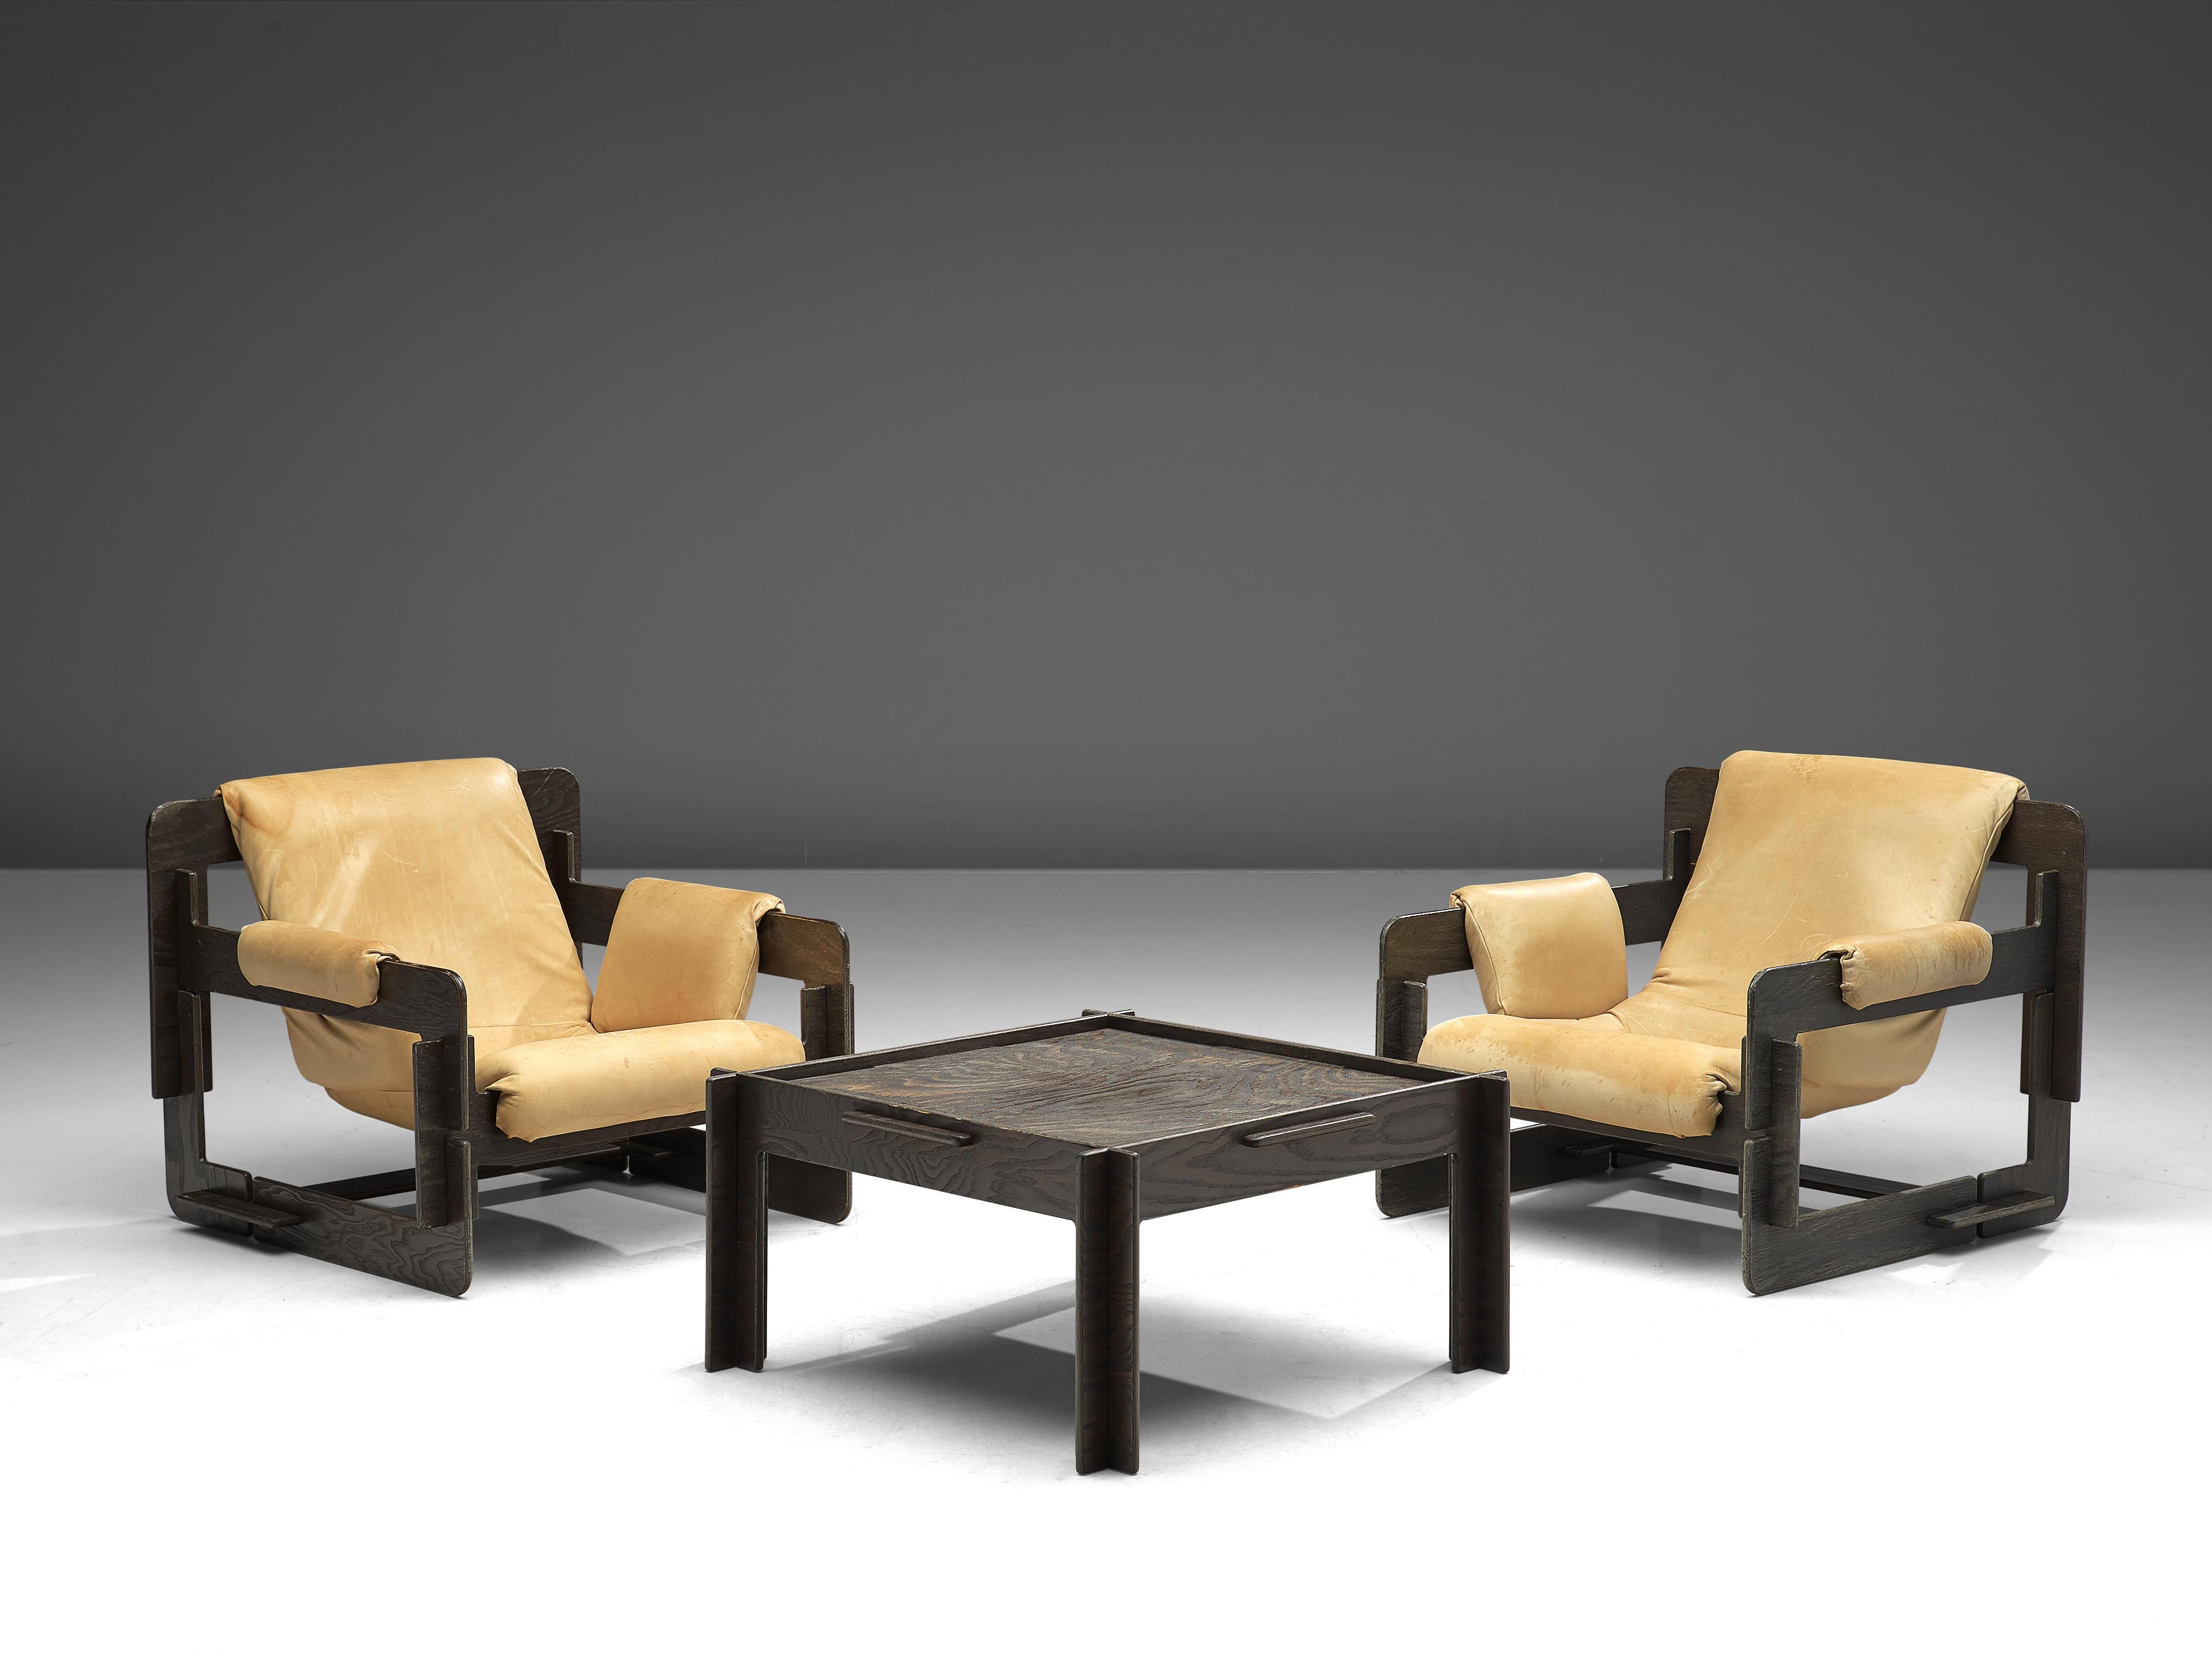 Arne Jacobsen Pair of 'Rover' Lounge Chairs in Wood and Leather 1